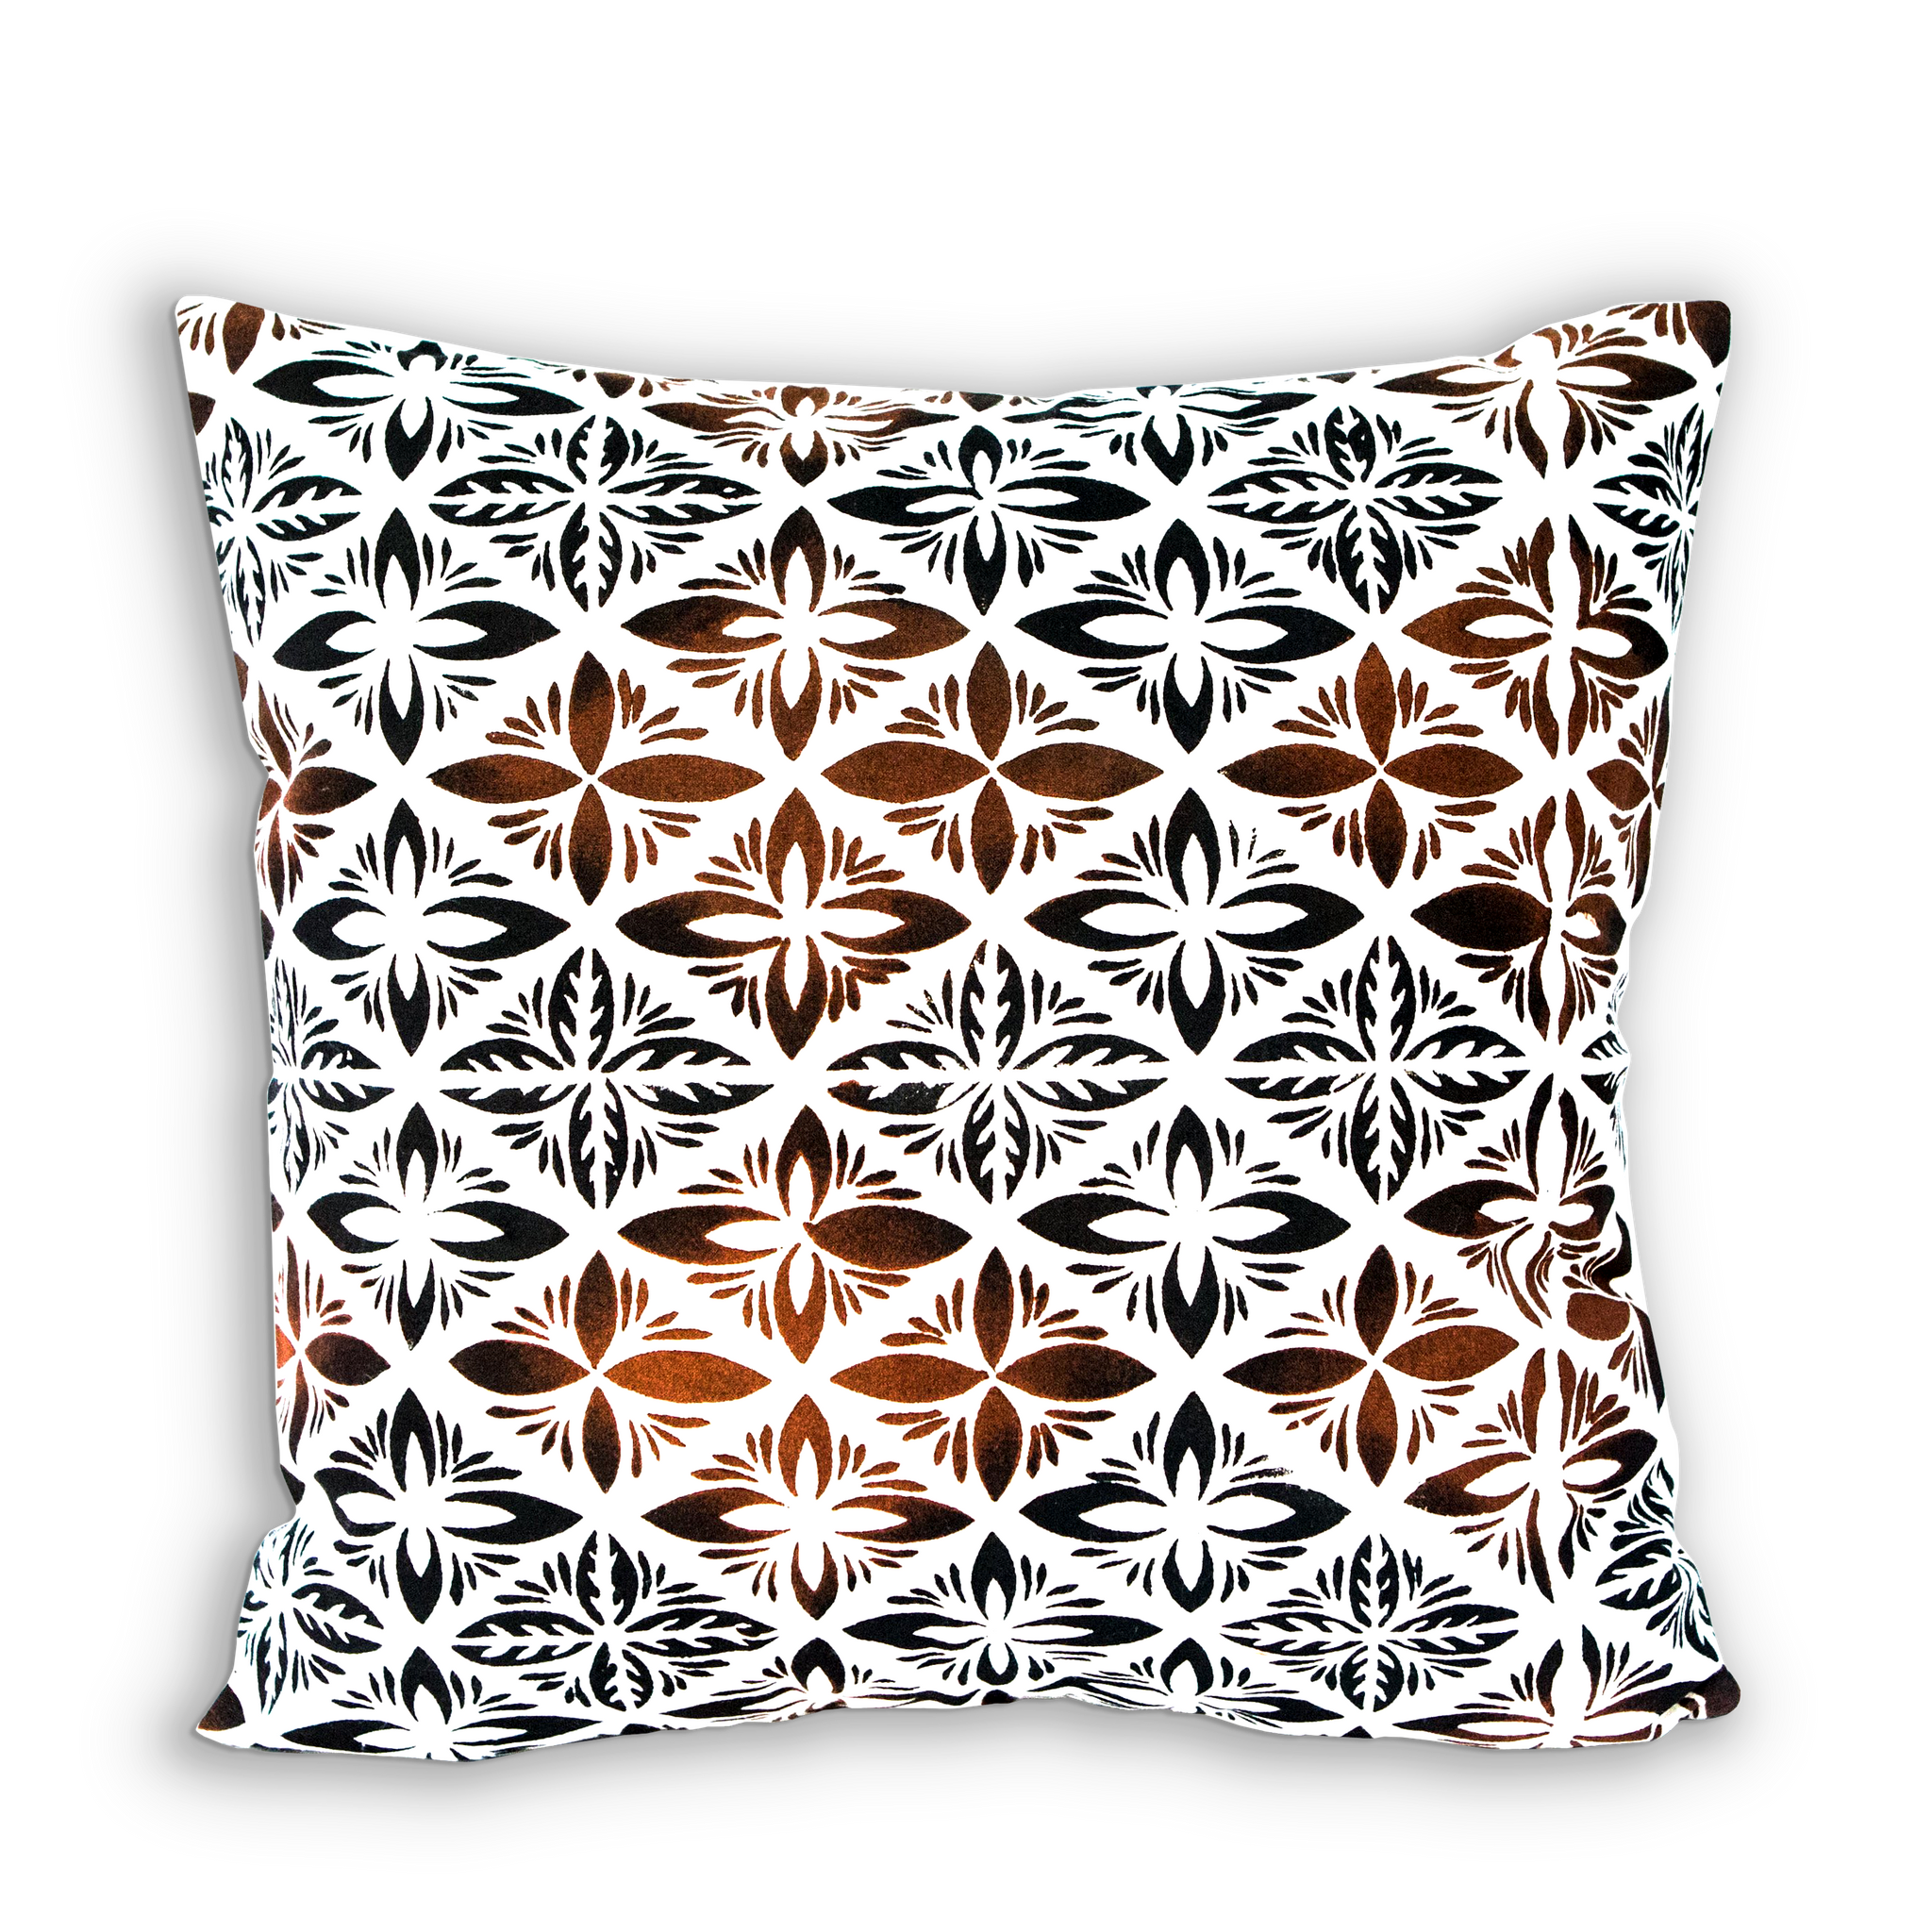 Cushion Cover "Intricate Siapo"